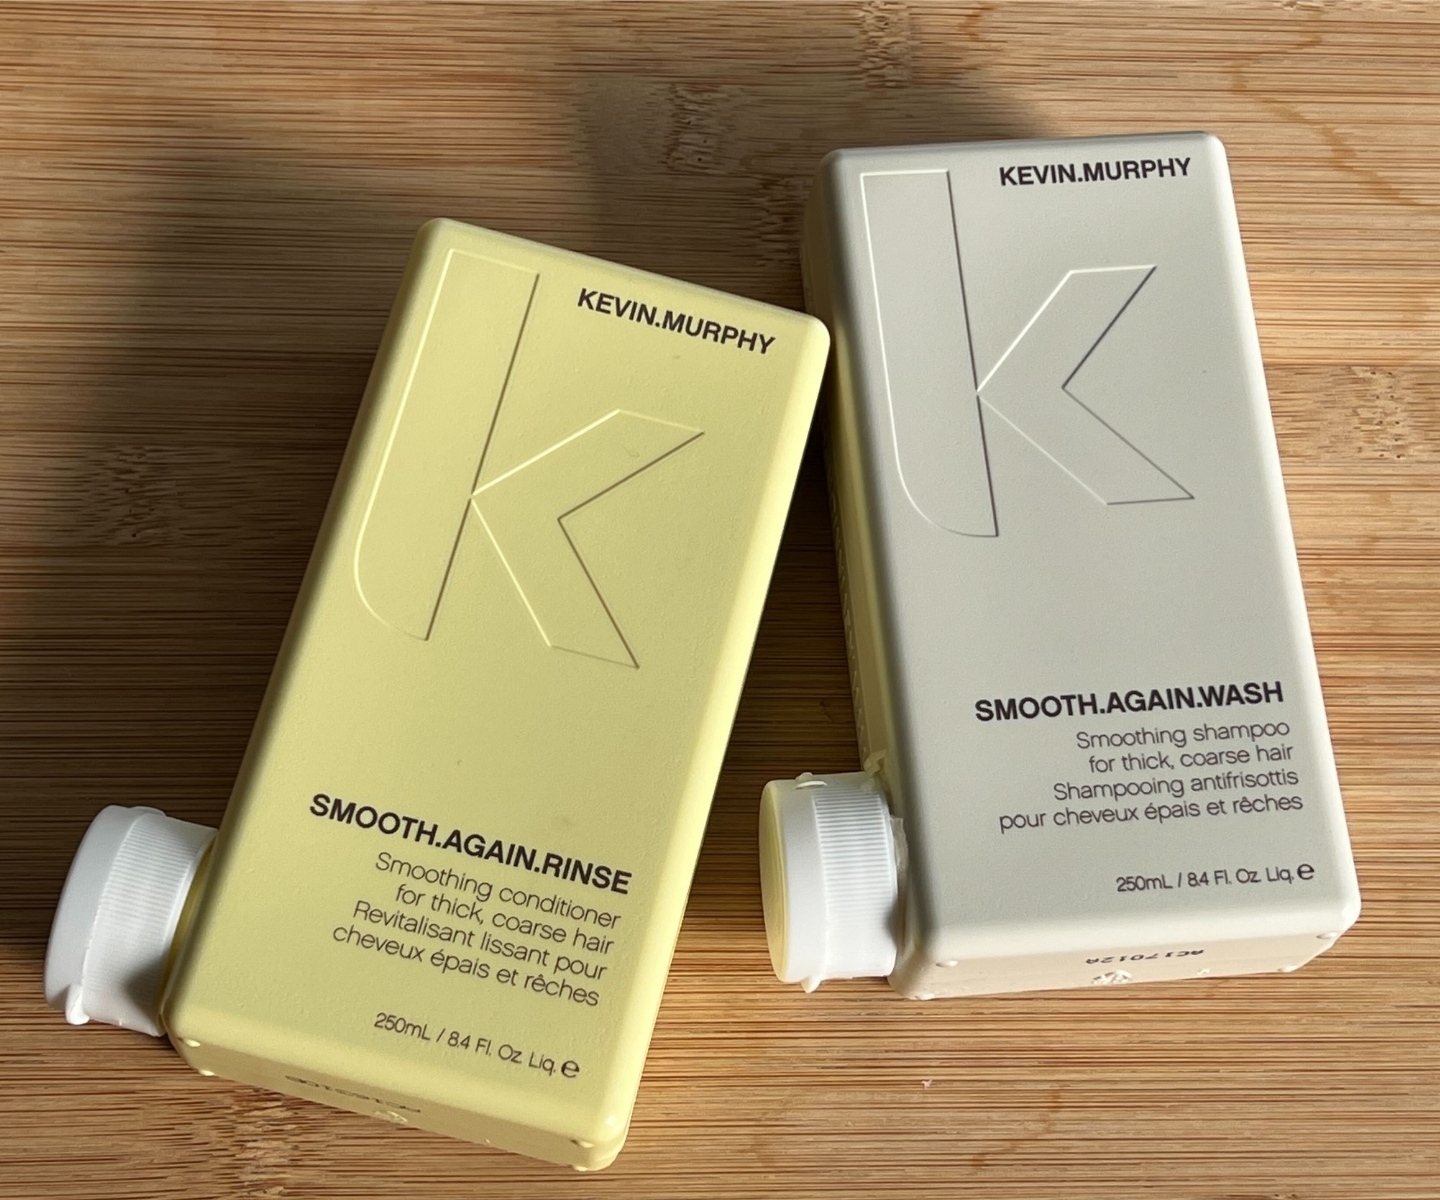 KEVIN.MURPHY Smooth Again Wash and KEVIN.MURPHY Smooth Again Rinse